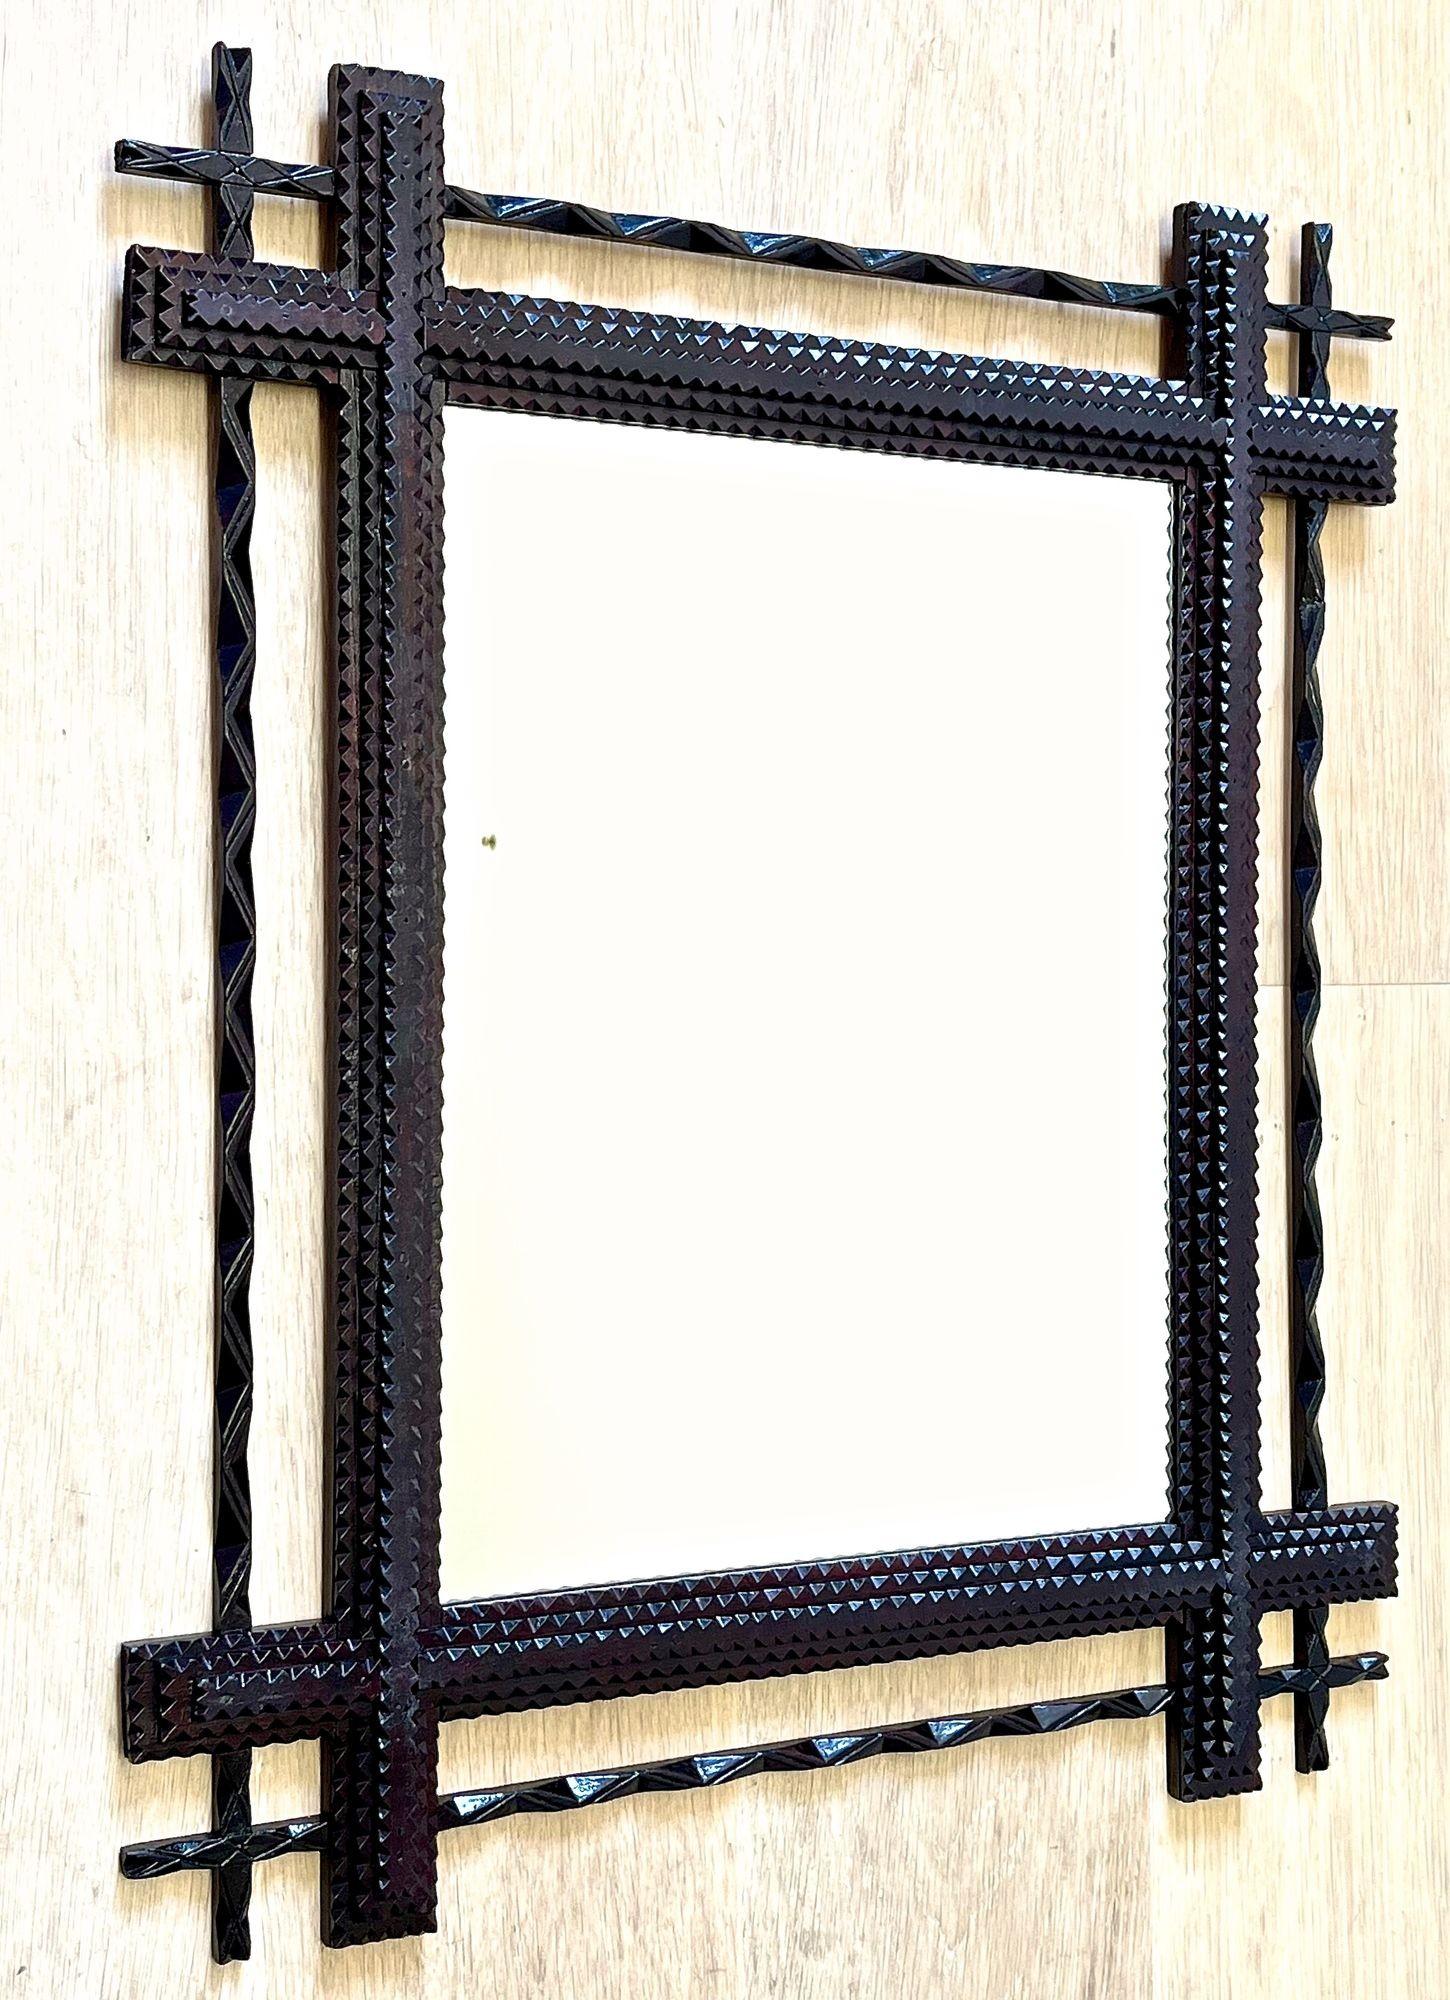 Extraordinary rustic Tramp Art mirror from the late 19th century in Austria around 1890. This wooden wall mirror has been effortfully hand carved out of basswood and comes with a dark brown stained surface in great original condition. Highlighted